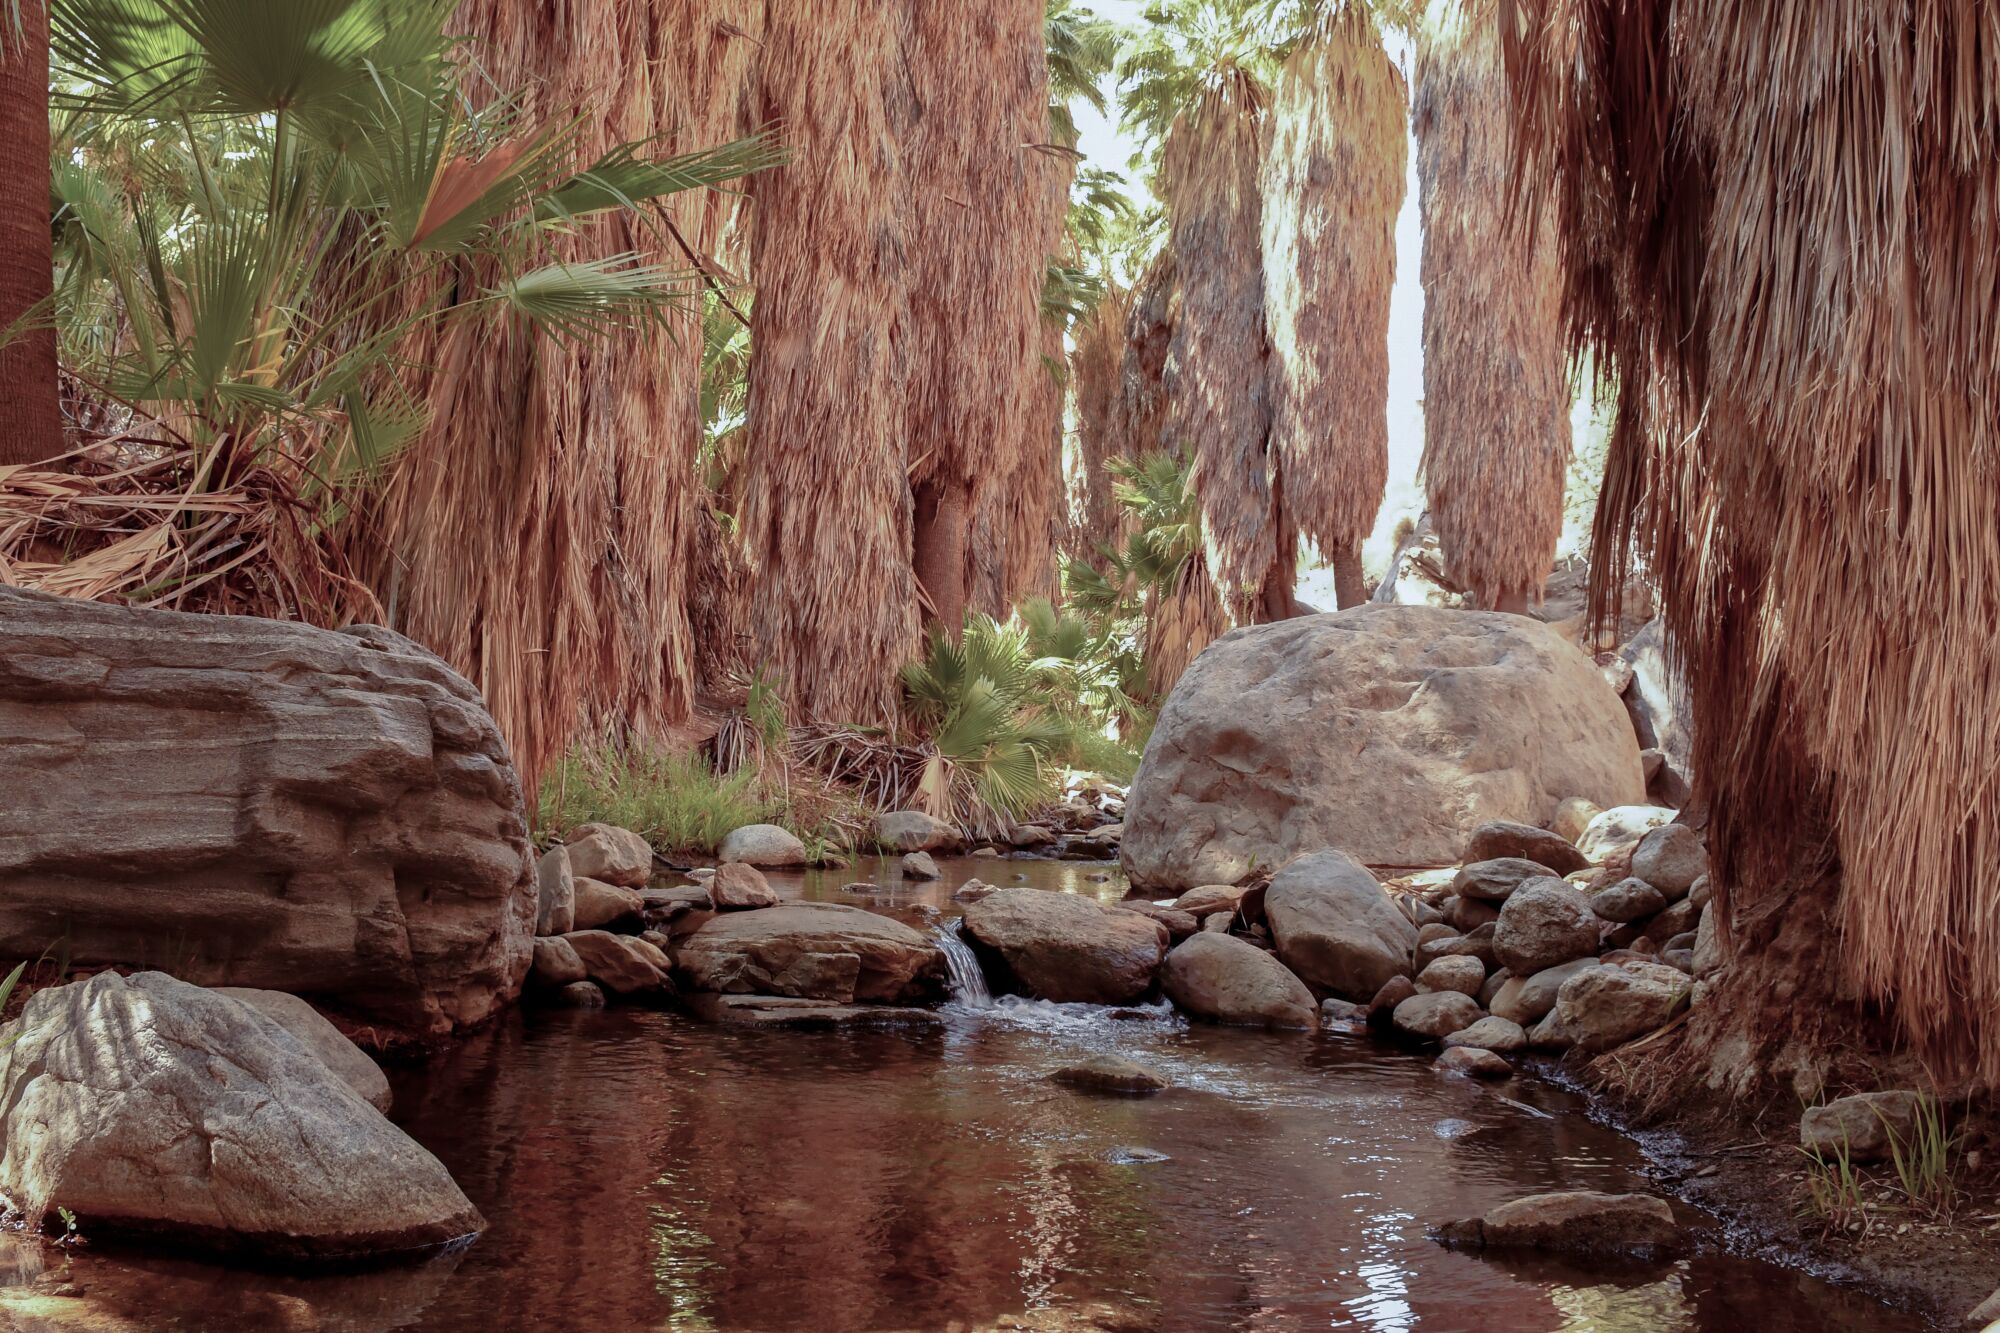 A creek in the middle of California fan palms